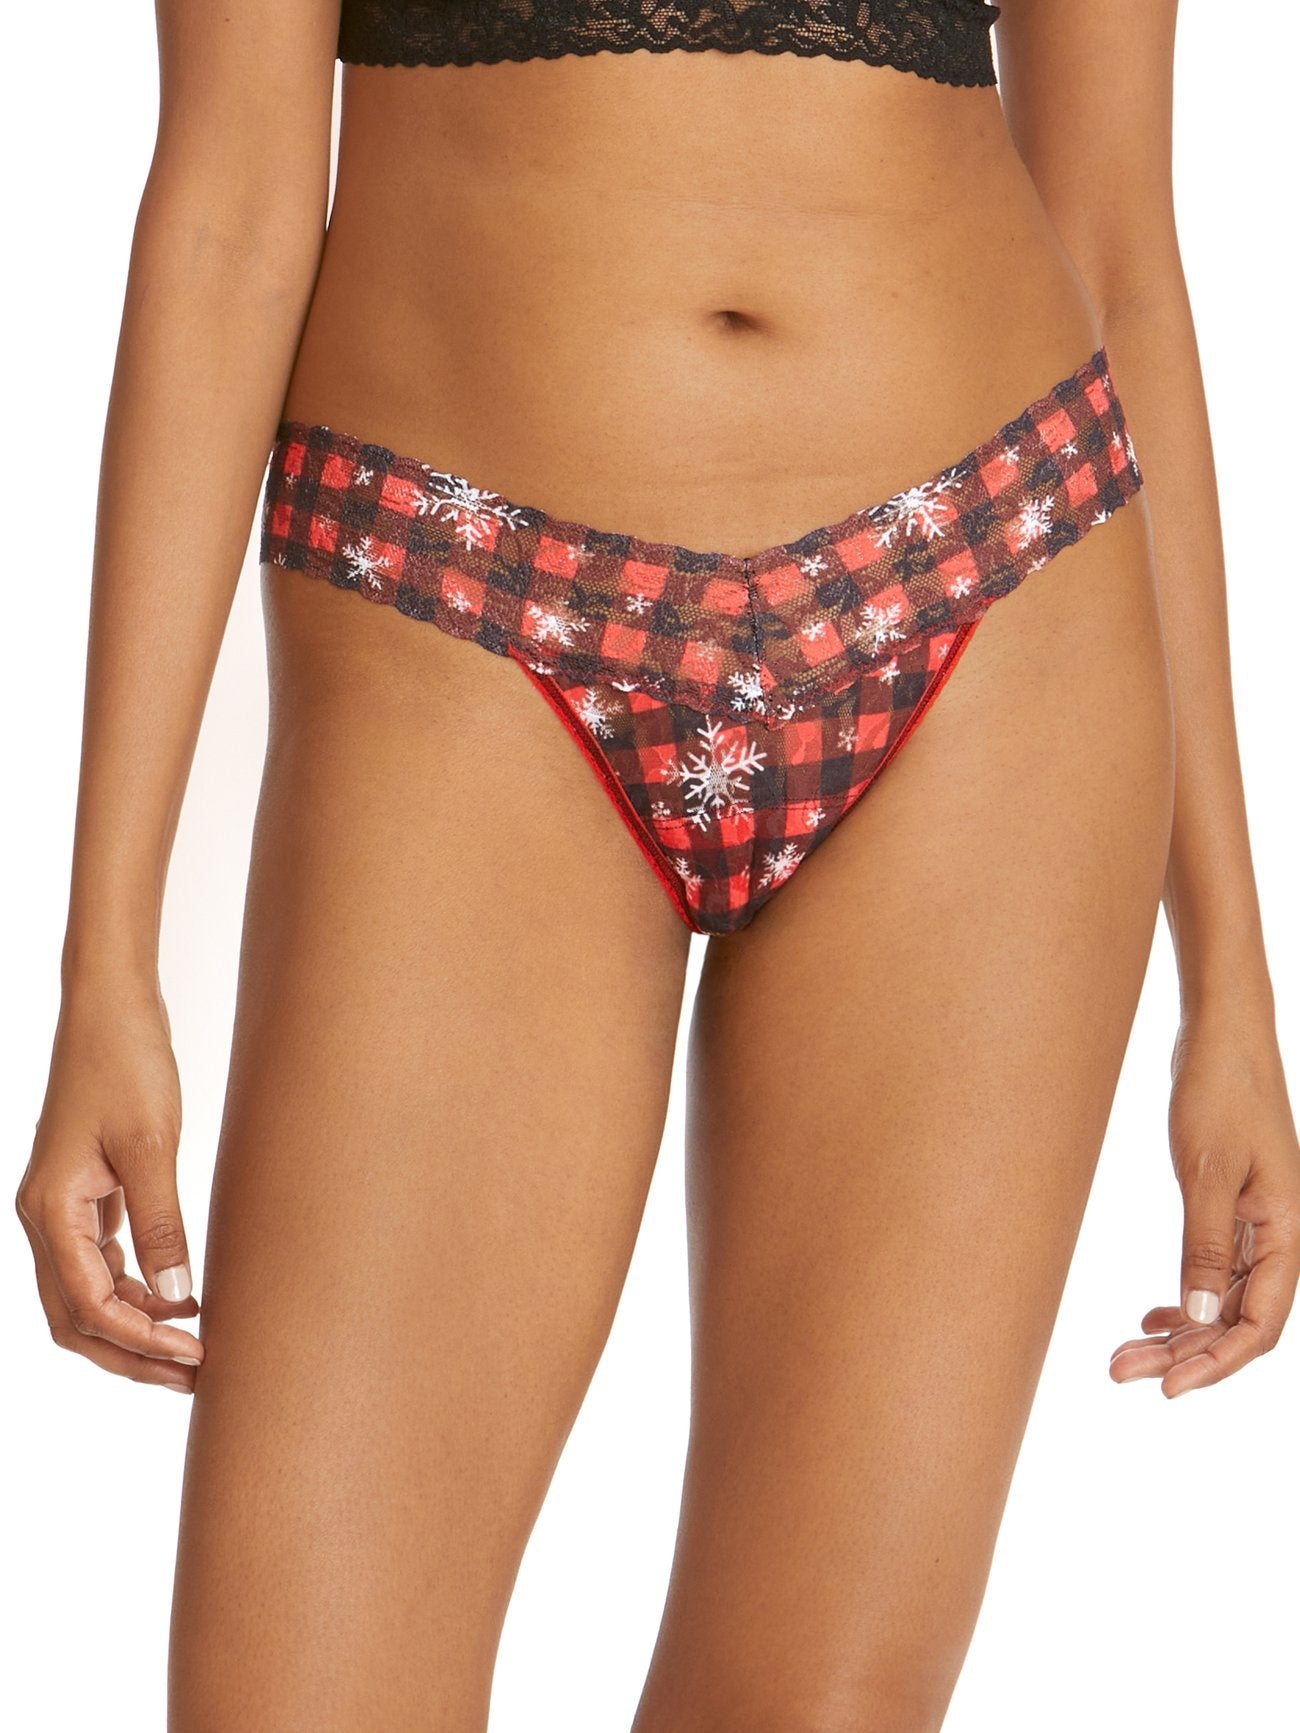 Hanky Panky Home for the Holidays Thong - My Filosophy